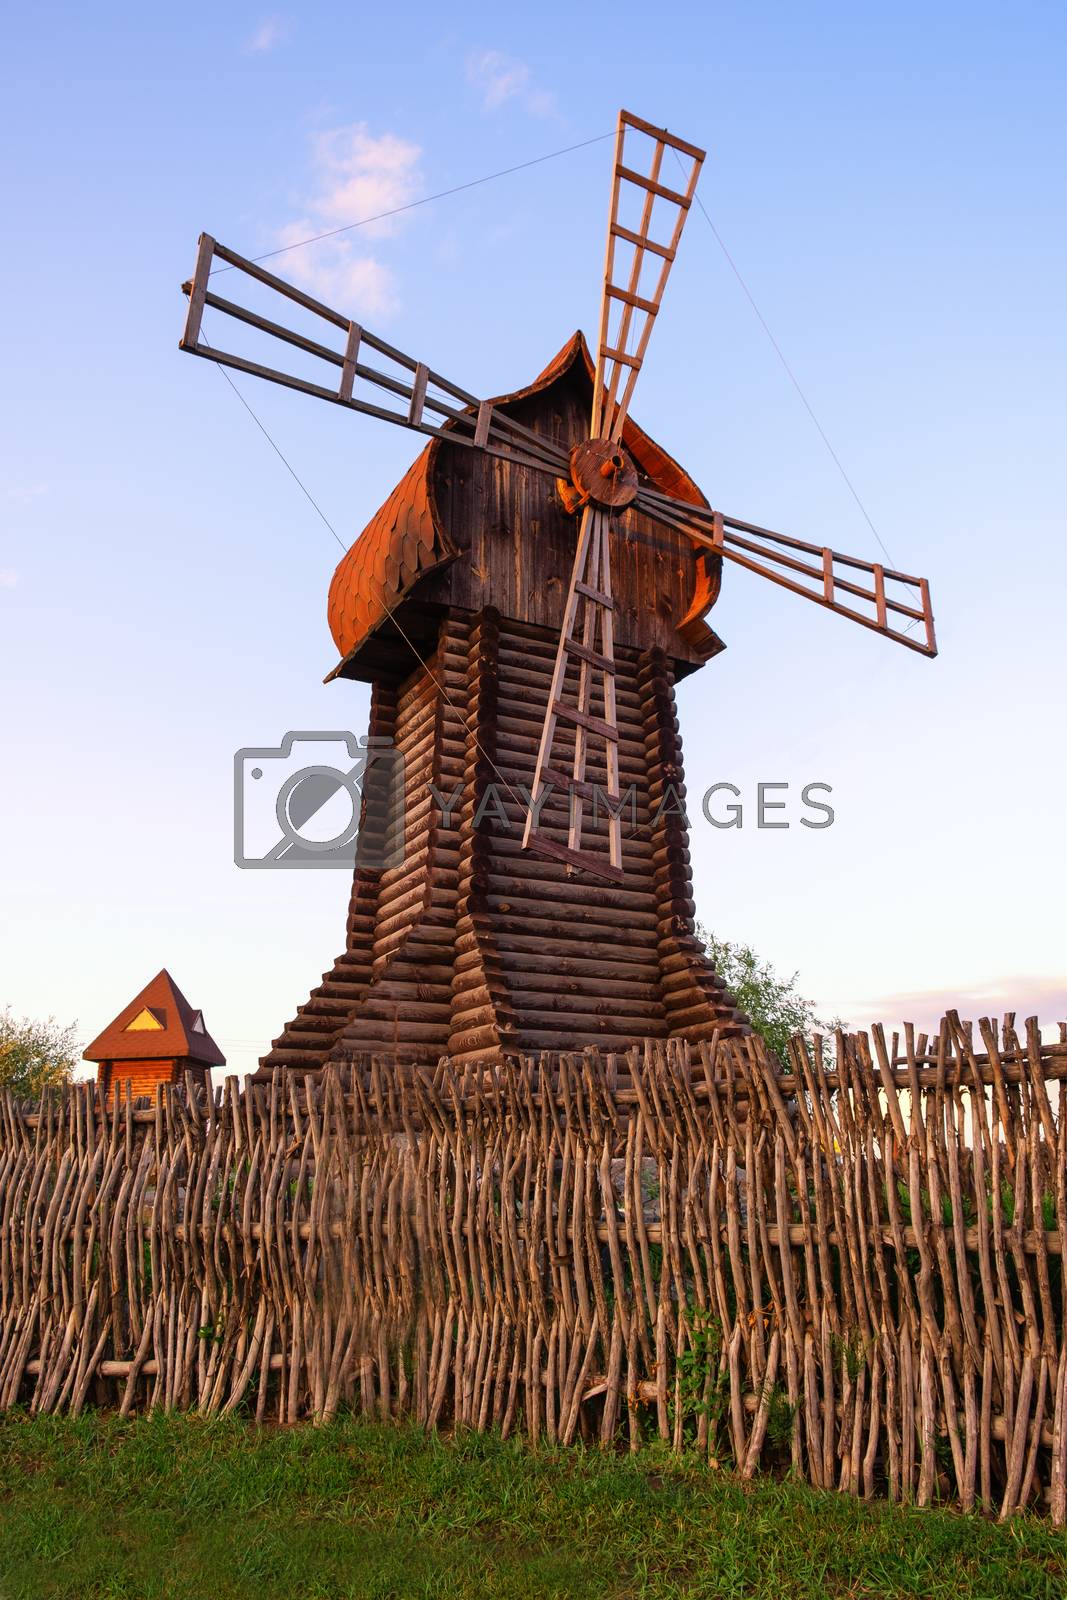 Royalty free image of Windmill traditional rural wind energy mill farm power ecology w by aleksei_romankin